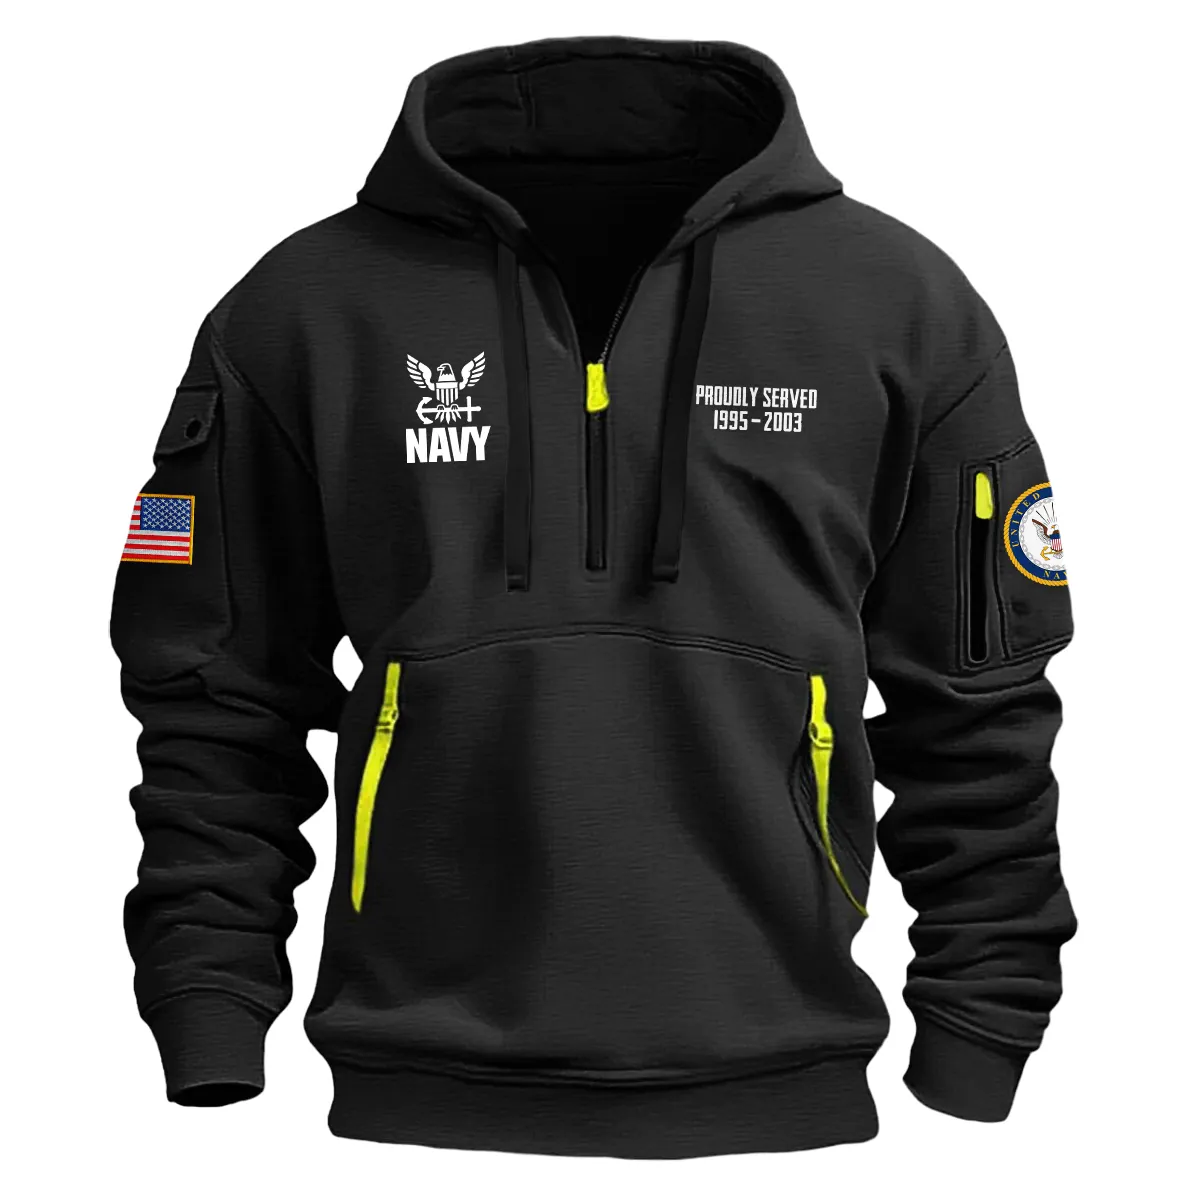 US Military All Branches! Personalized Gift MCPO U.S. Navy Fashion Hoodie Half Zipper